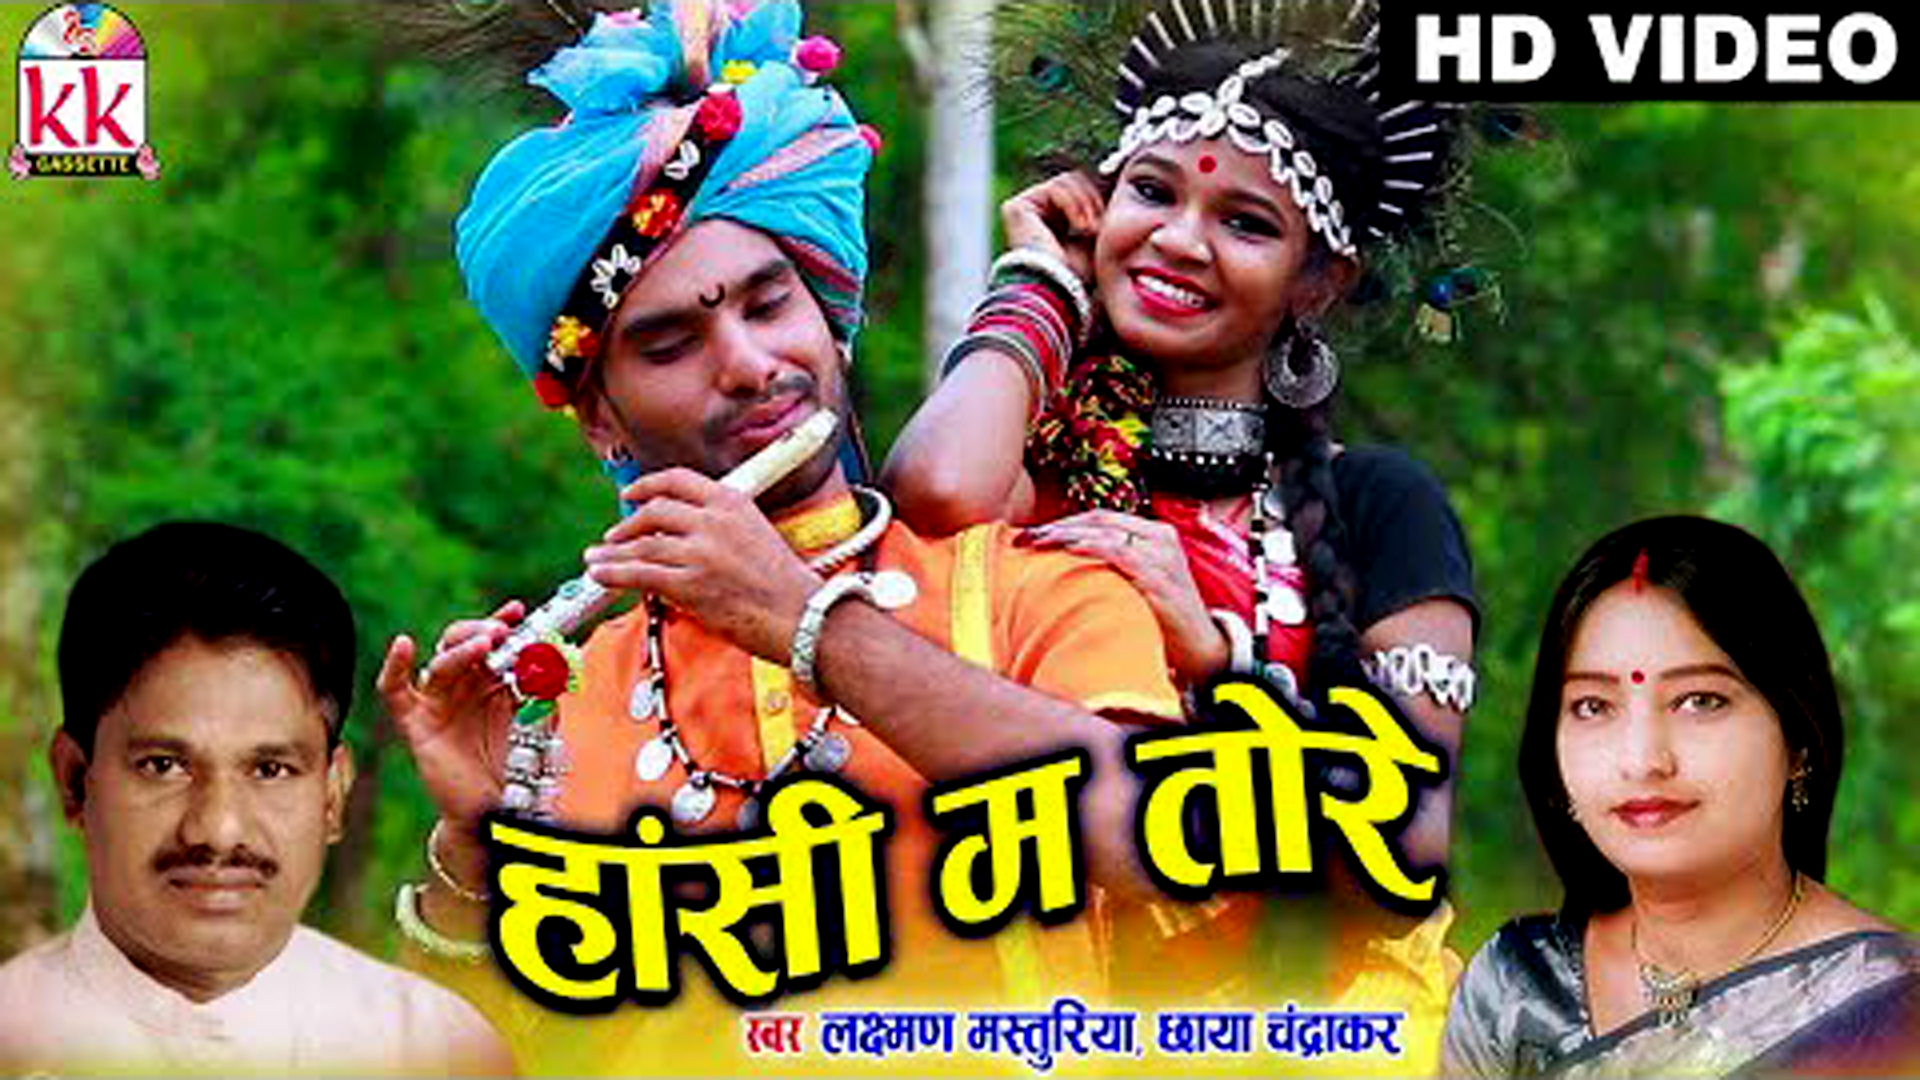 Chhattisgarhi Gana Video is Your Ticket to the Hottest Indian Performances!